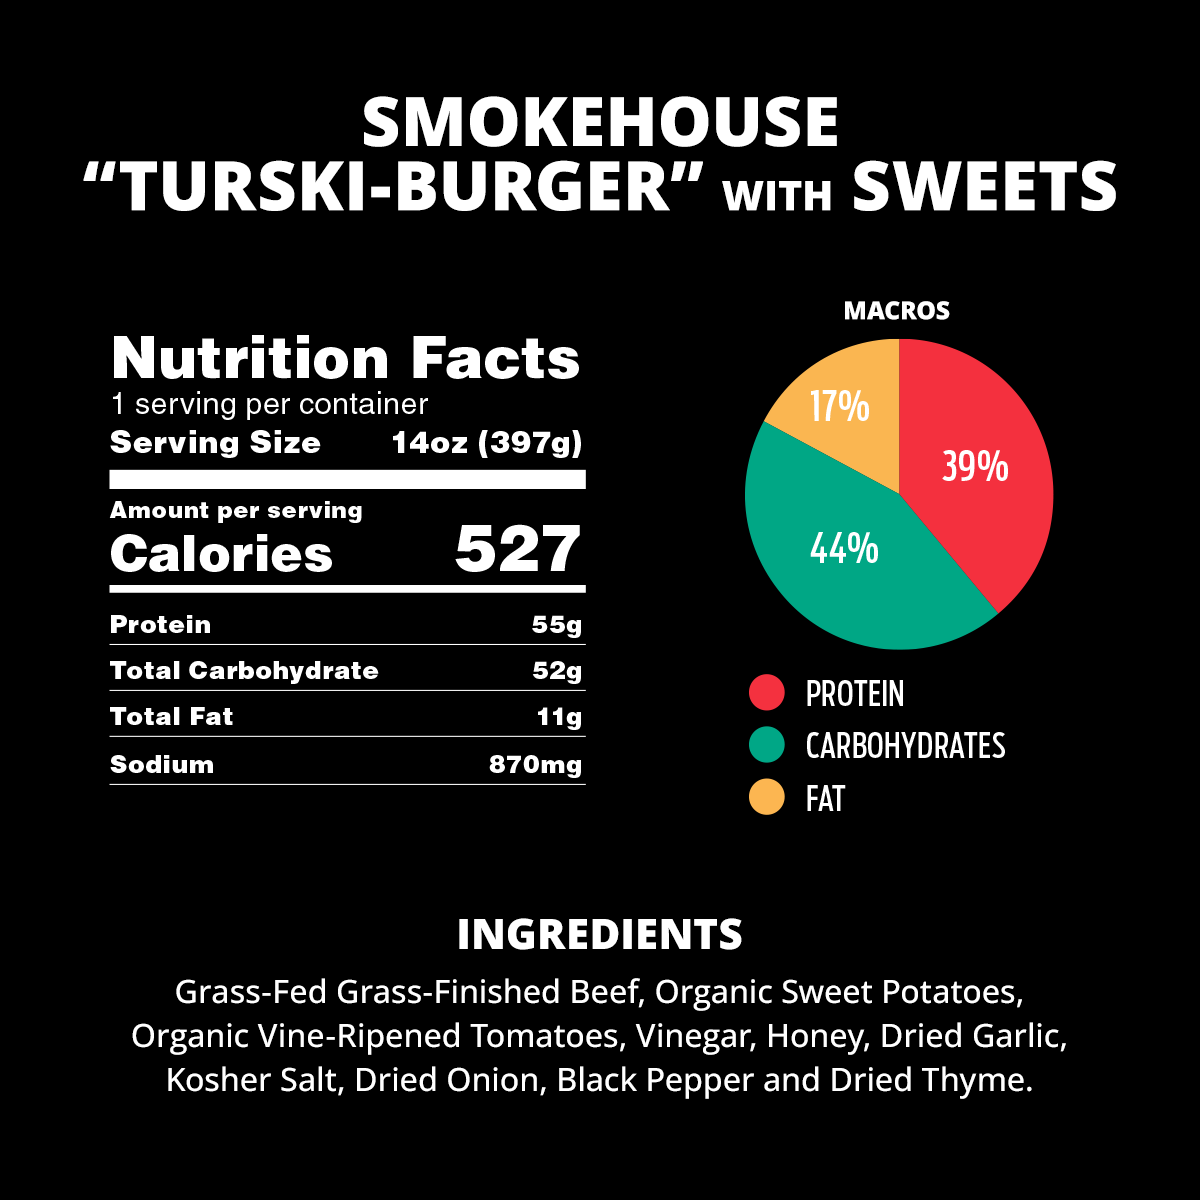 Grass-Fed "Turski Burger" with Sweets